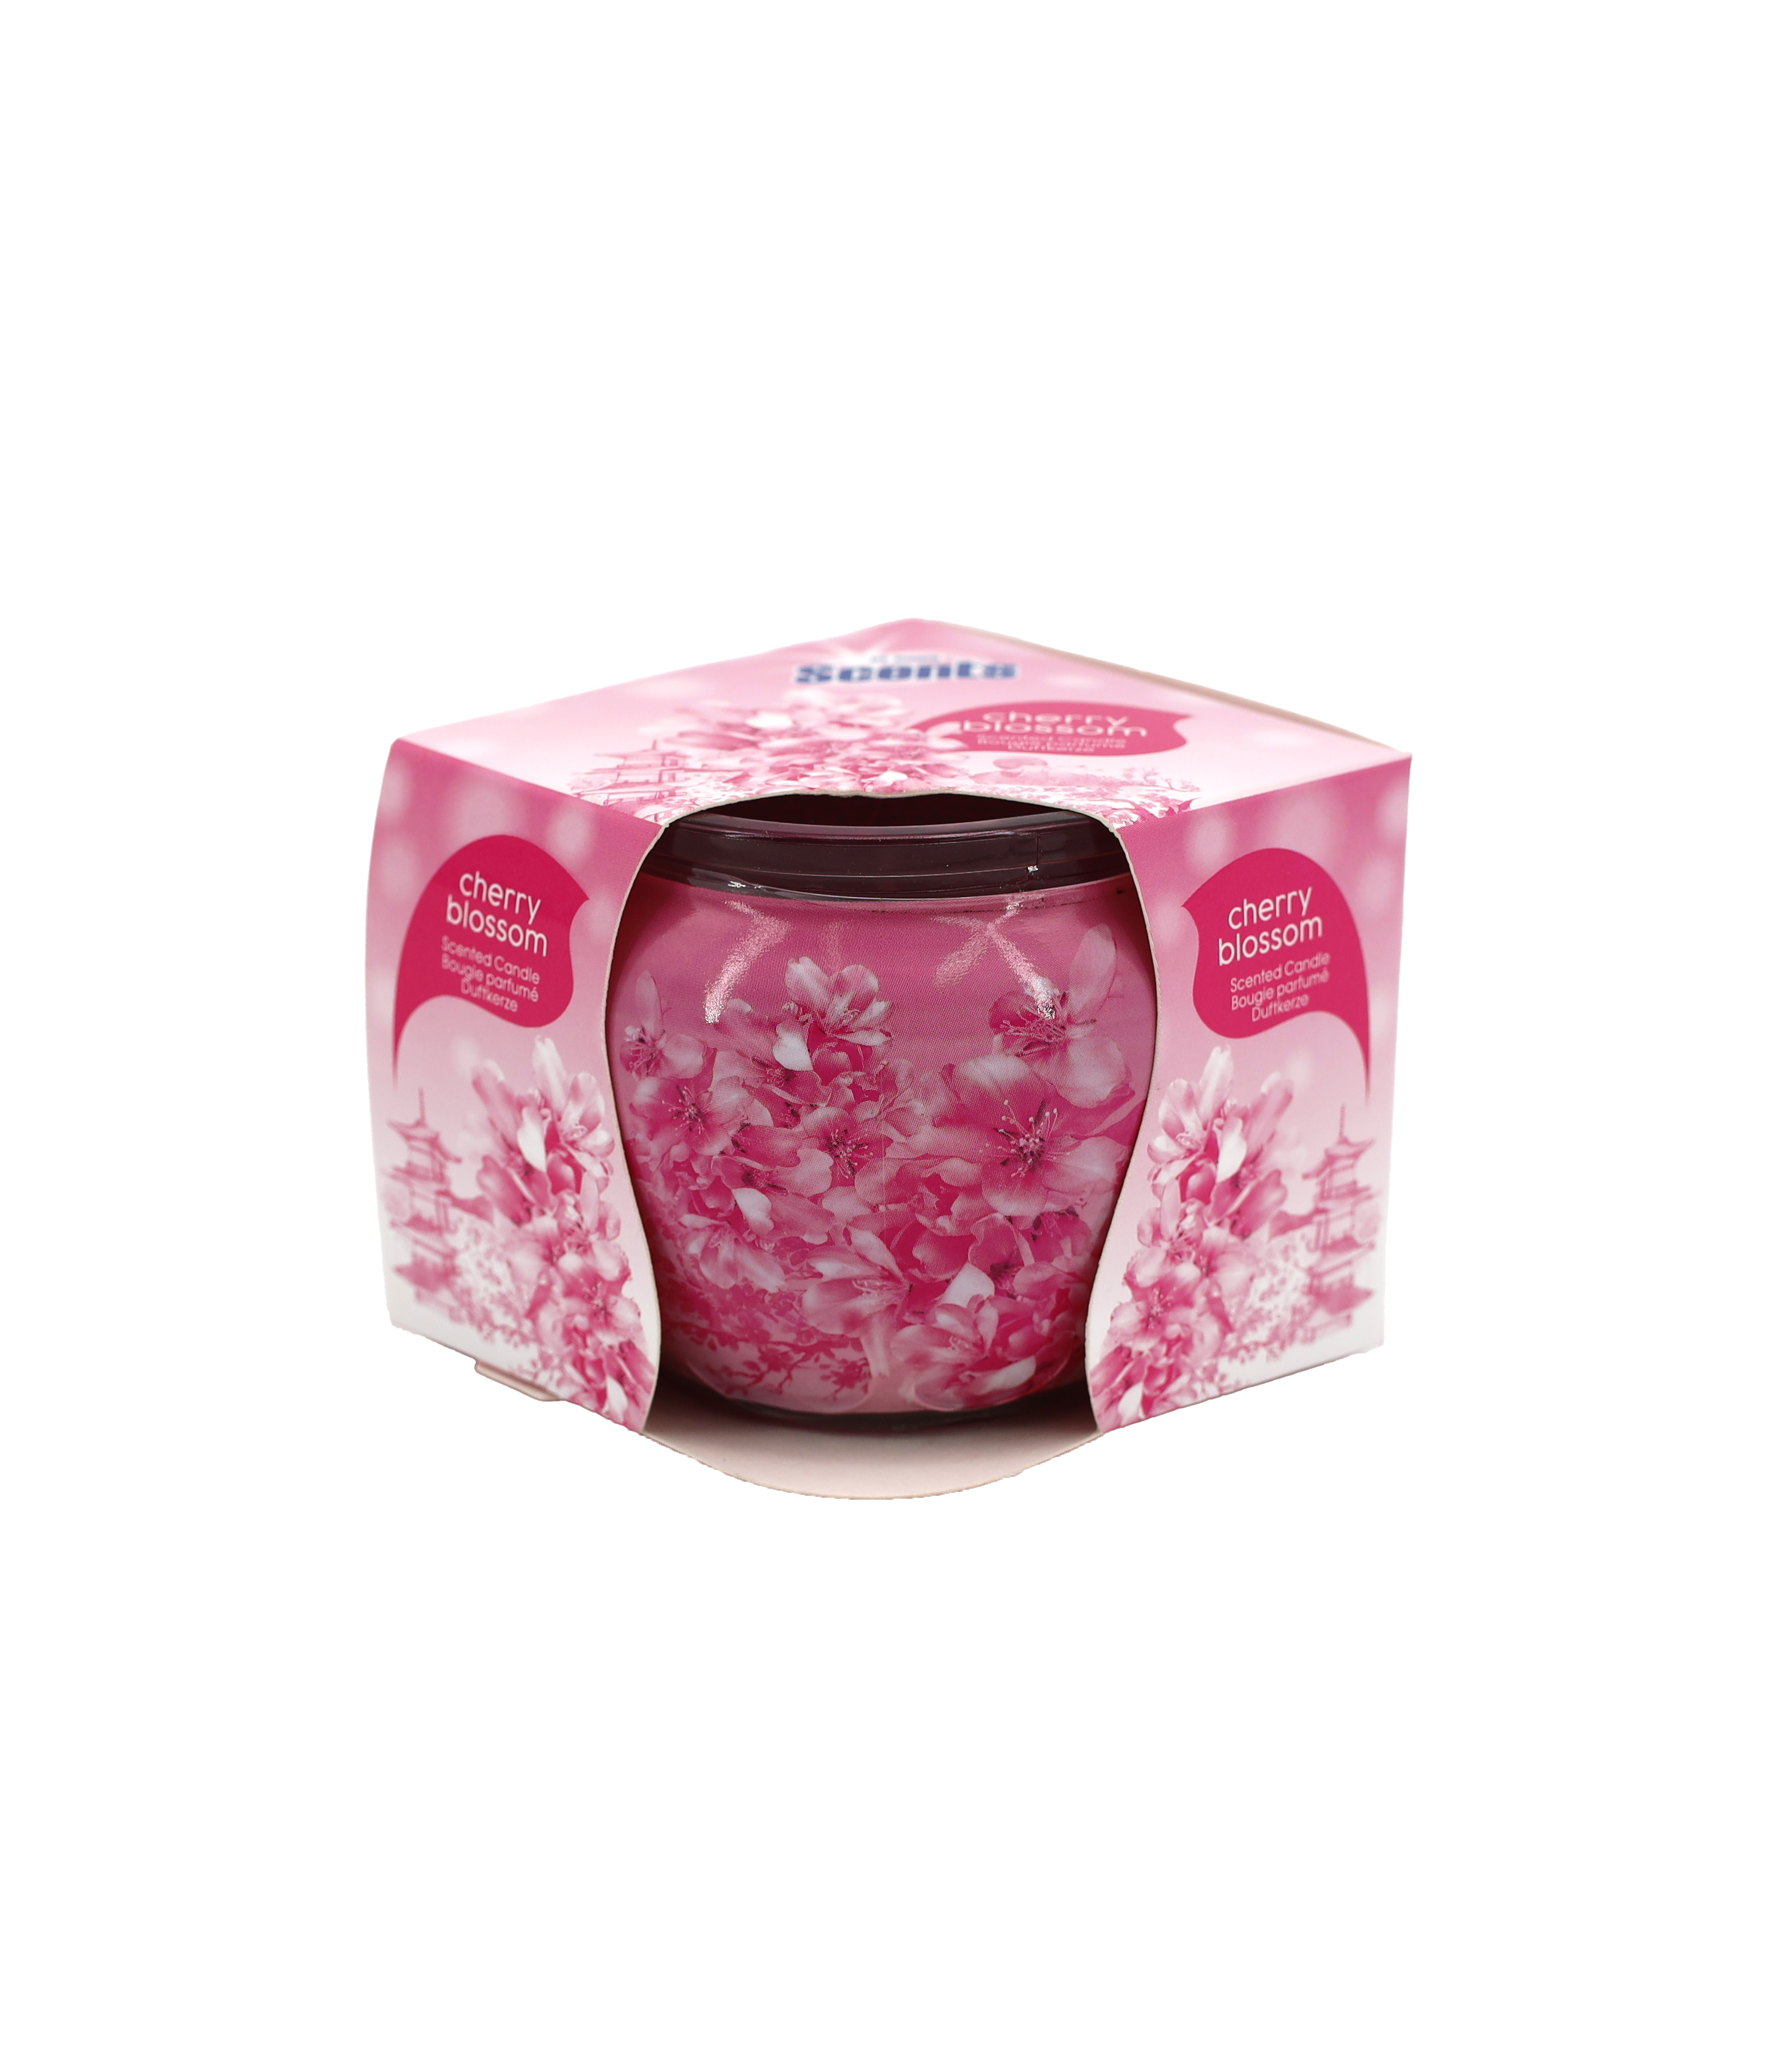 At Home Scents Duftkerze 70g Cherry Blossom